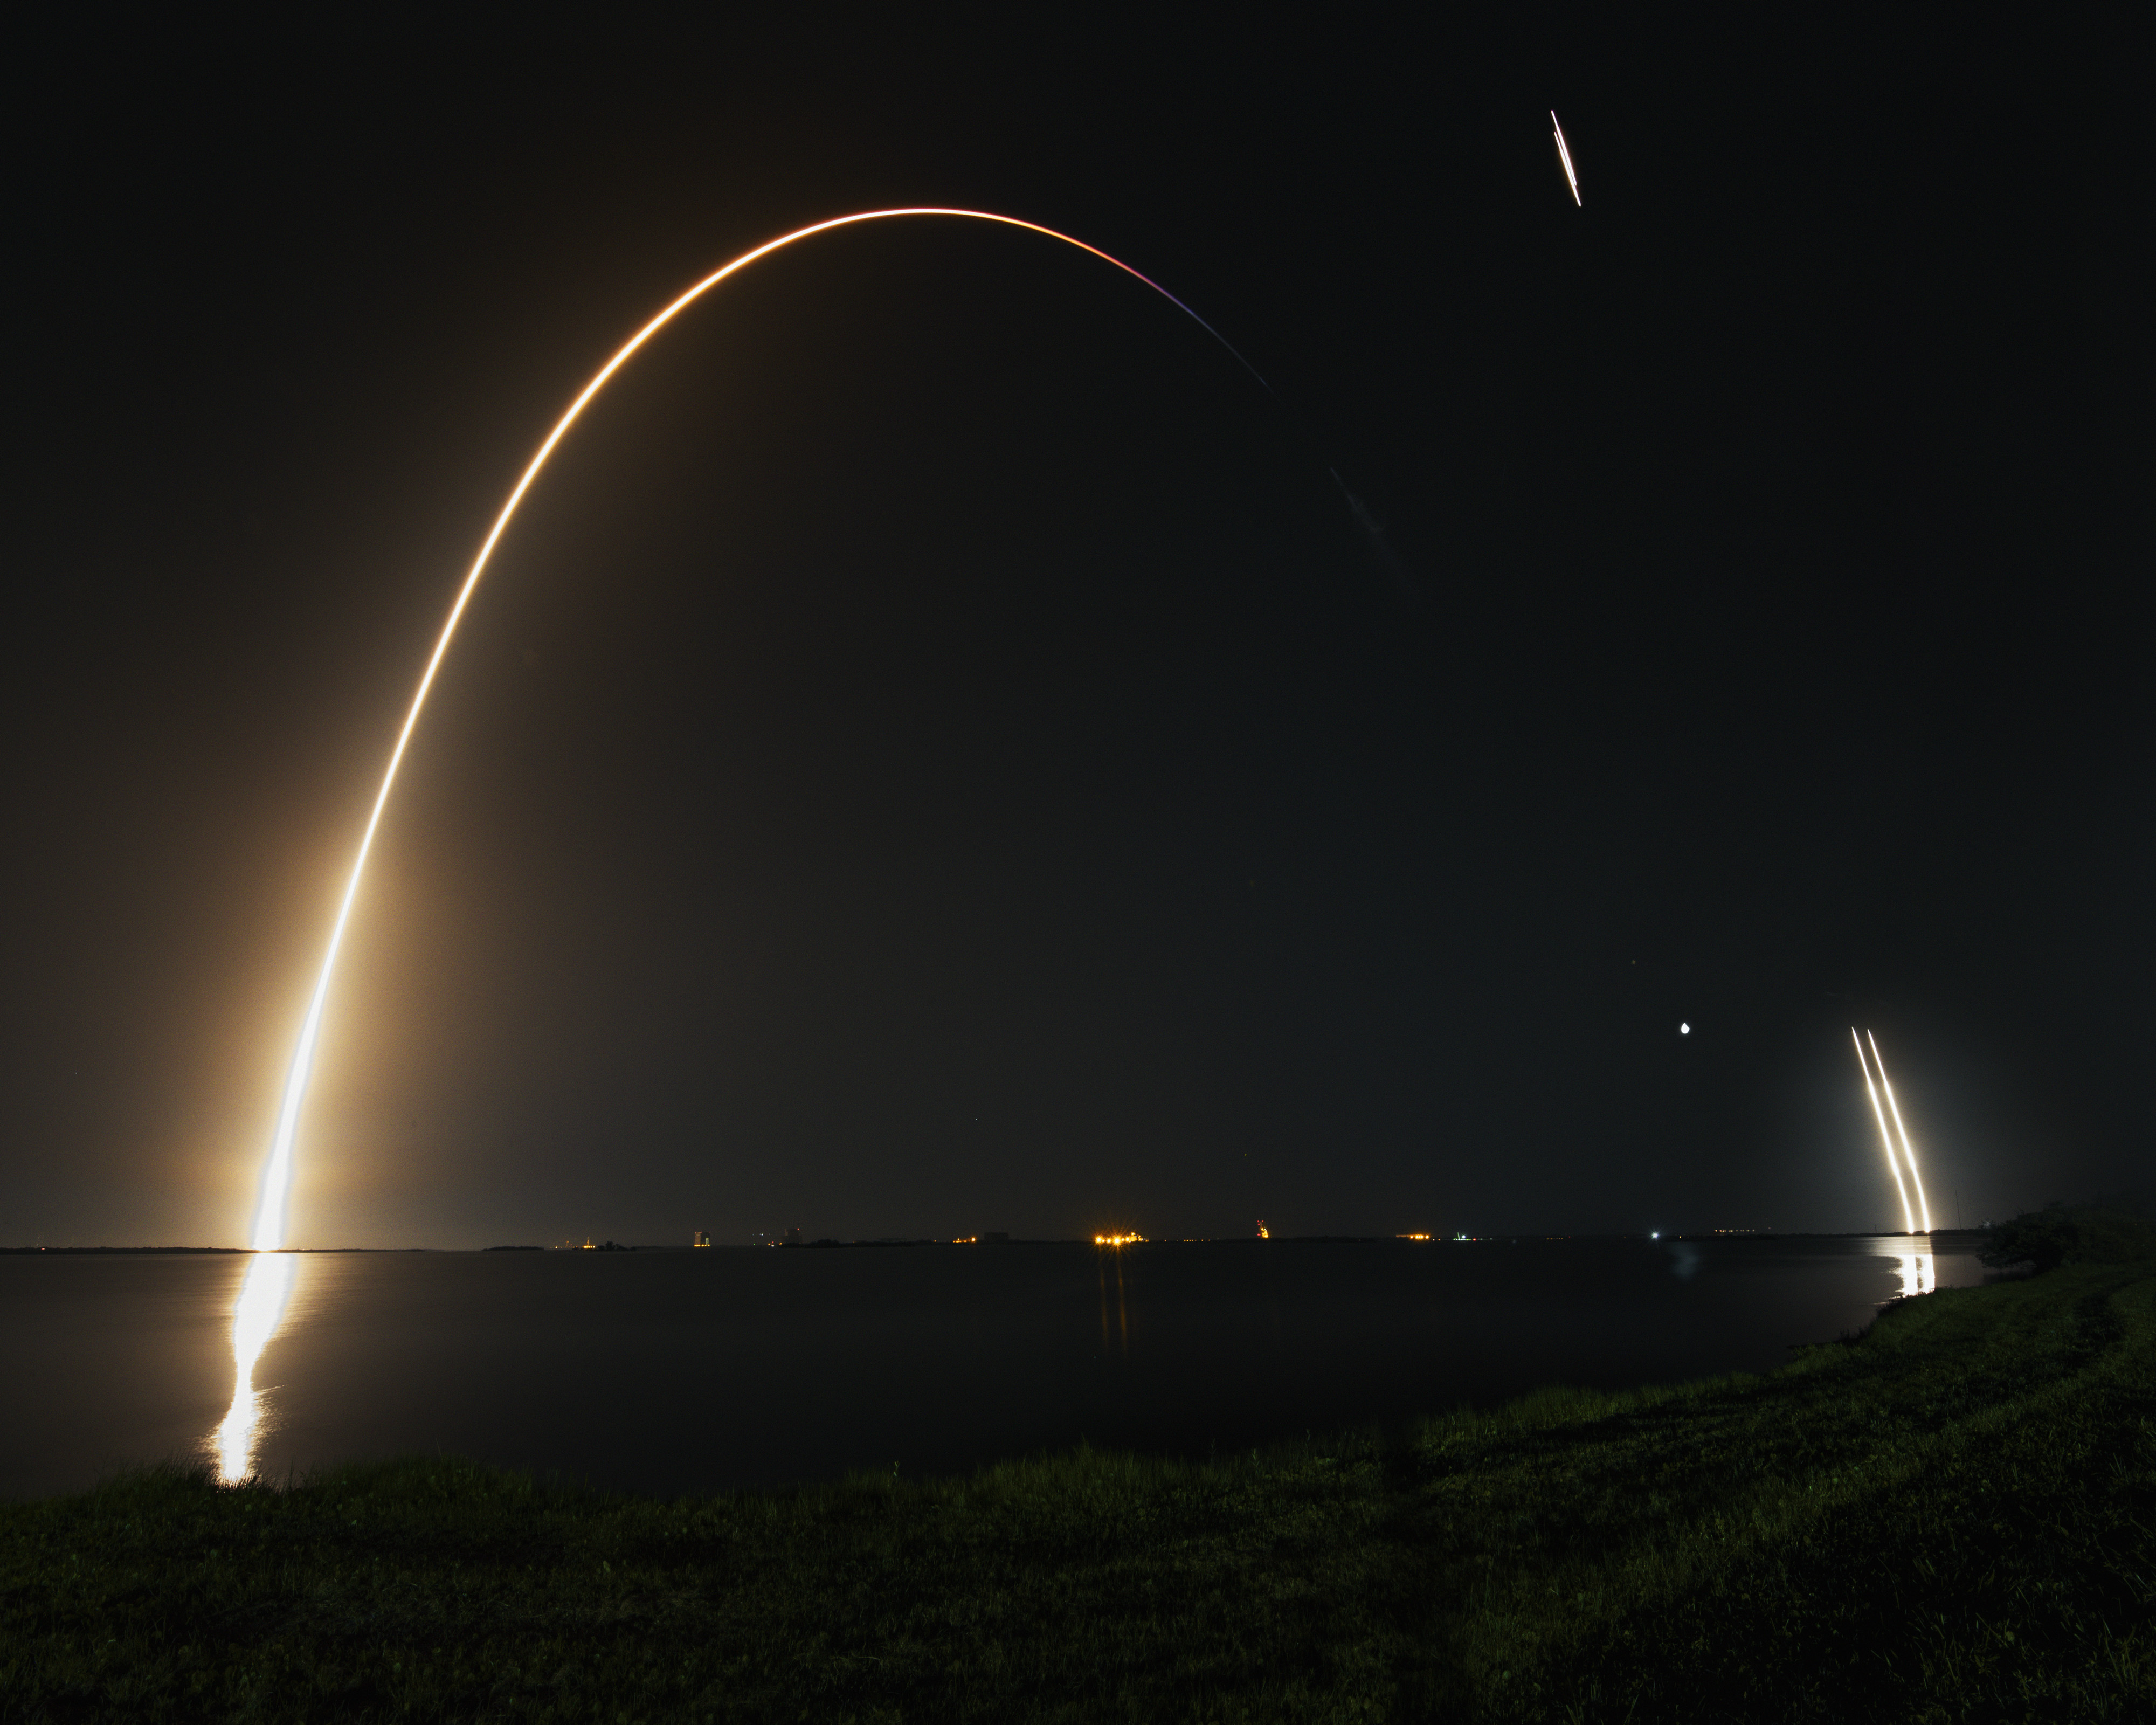 The Spacex Falcon launch watched by photographers